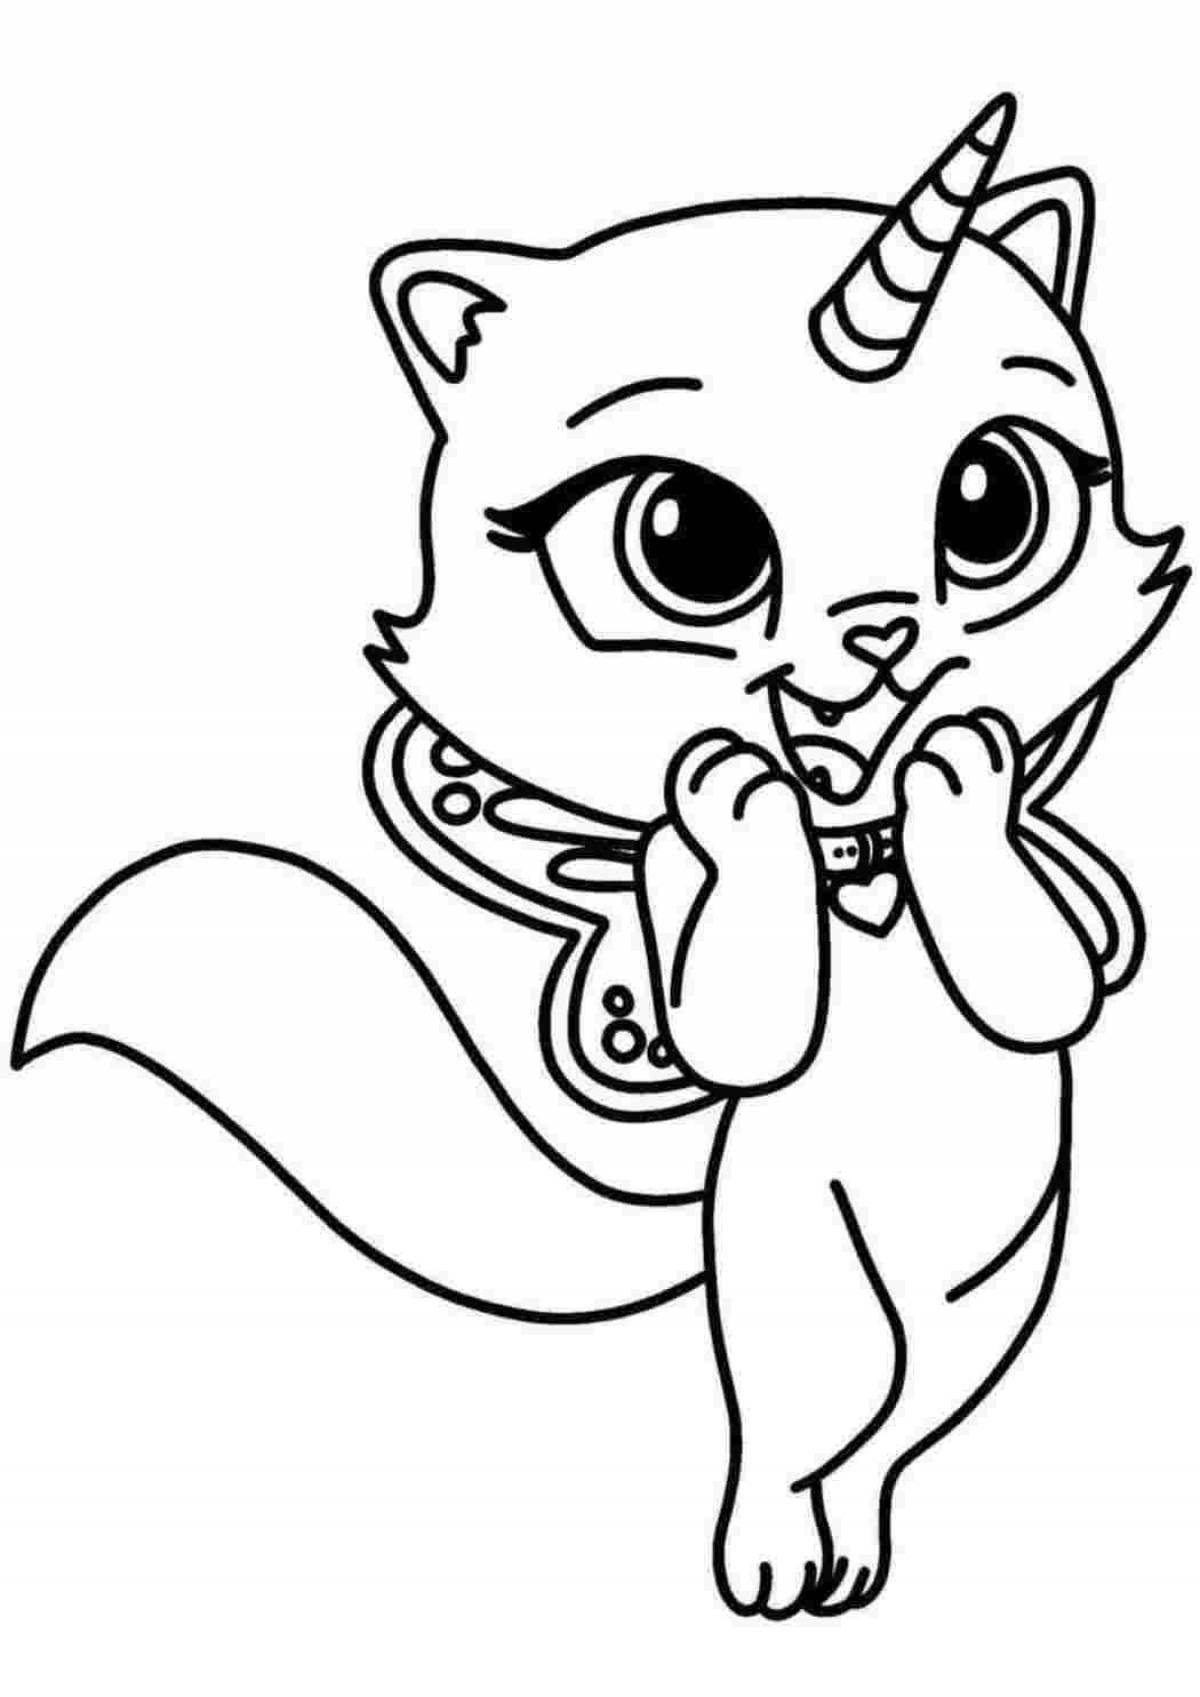 Radiant coloring page catunicorn